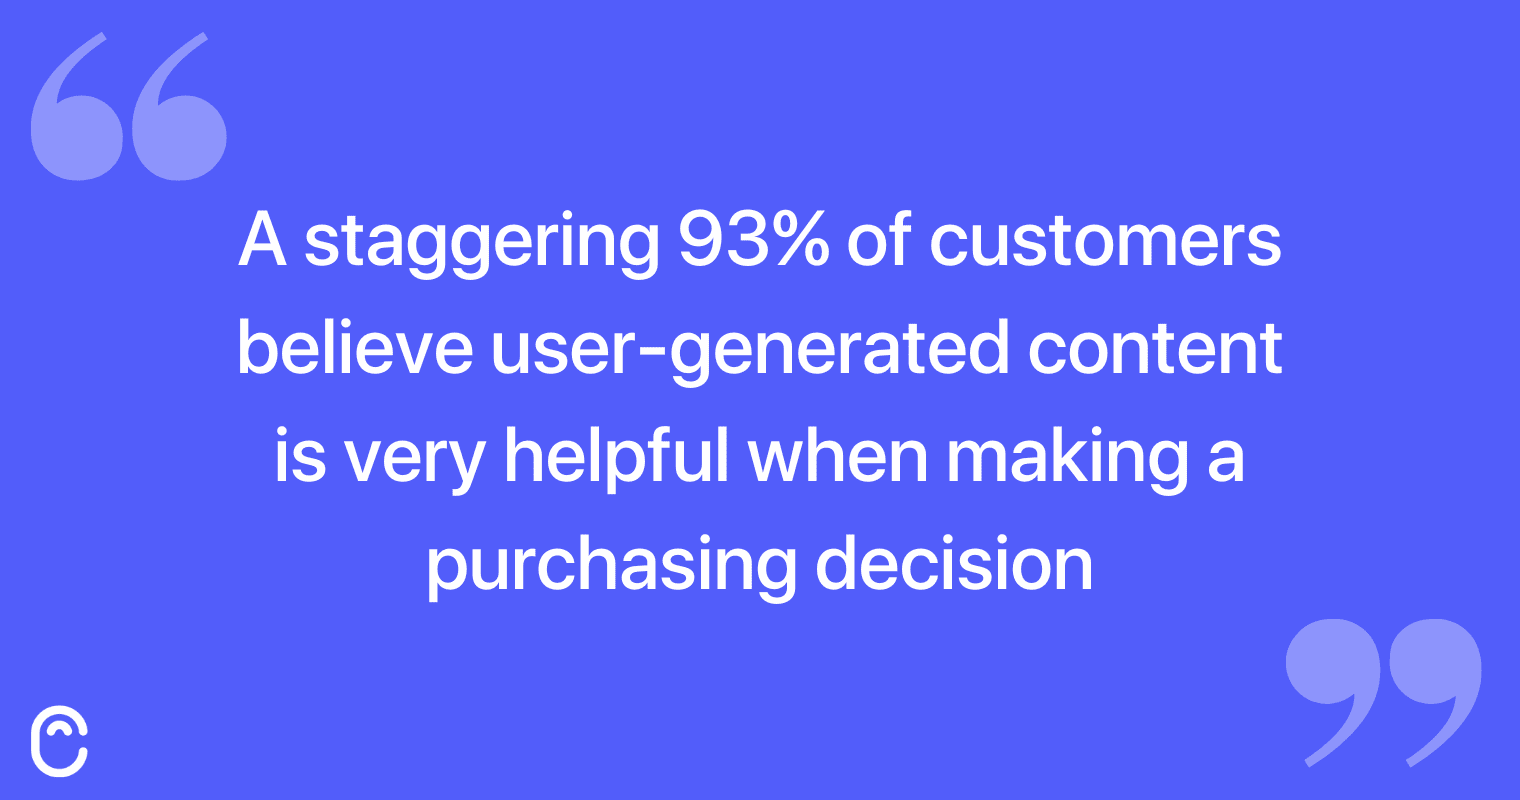 A staggering 93% of customers believe user-generated content is very helpful when making a purchasing decision